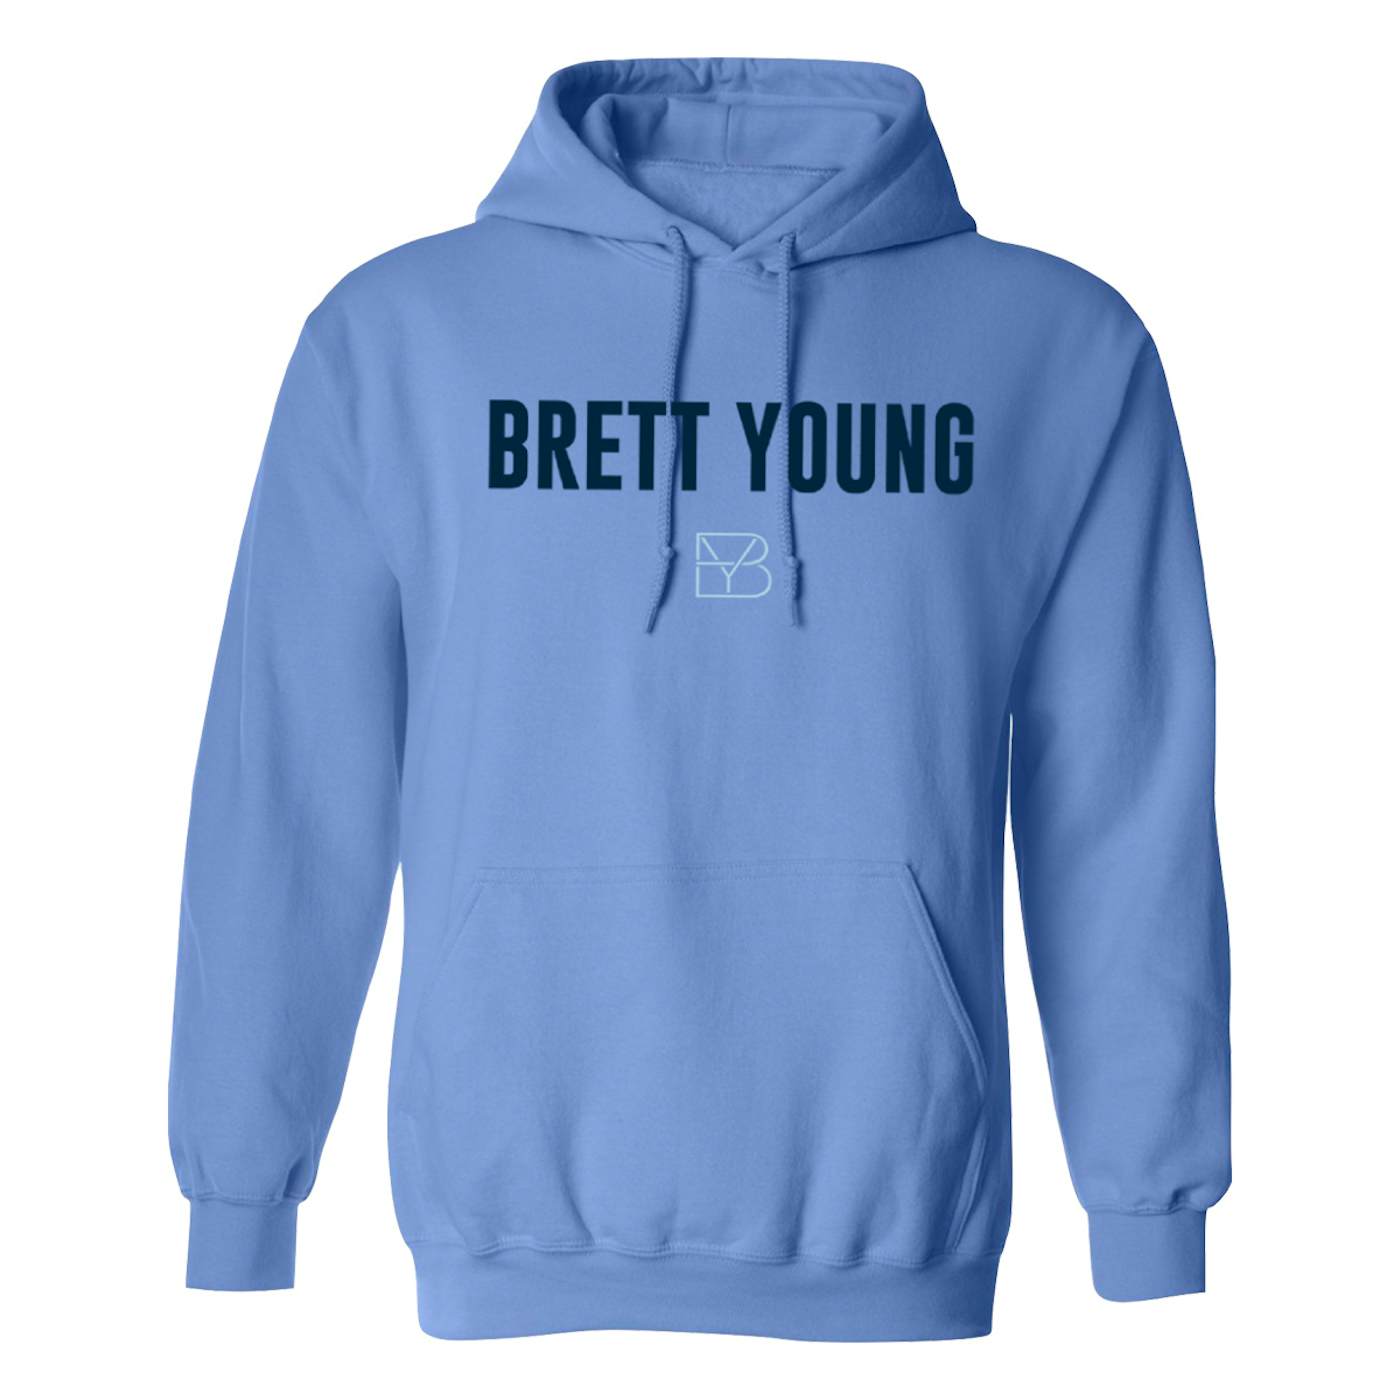 Brett Young 2023 Tour Hoodie